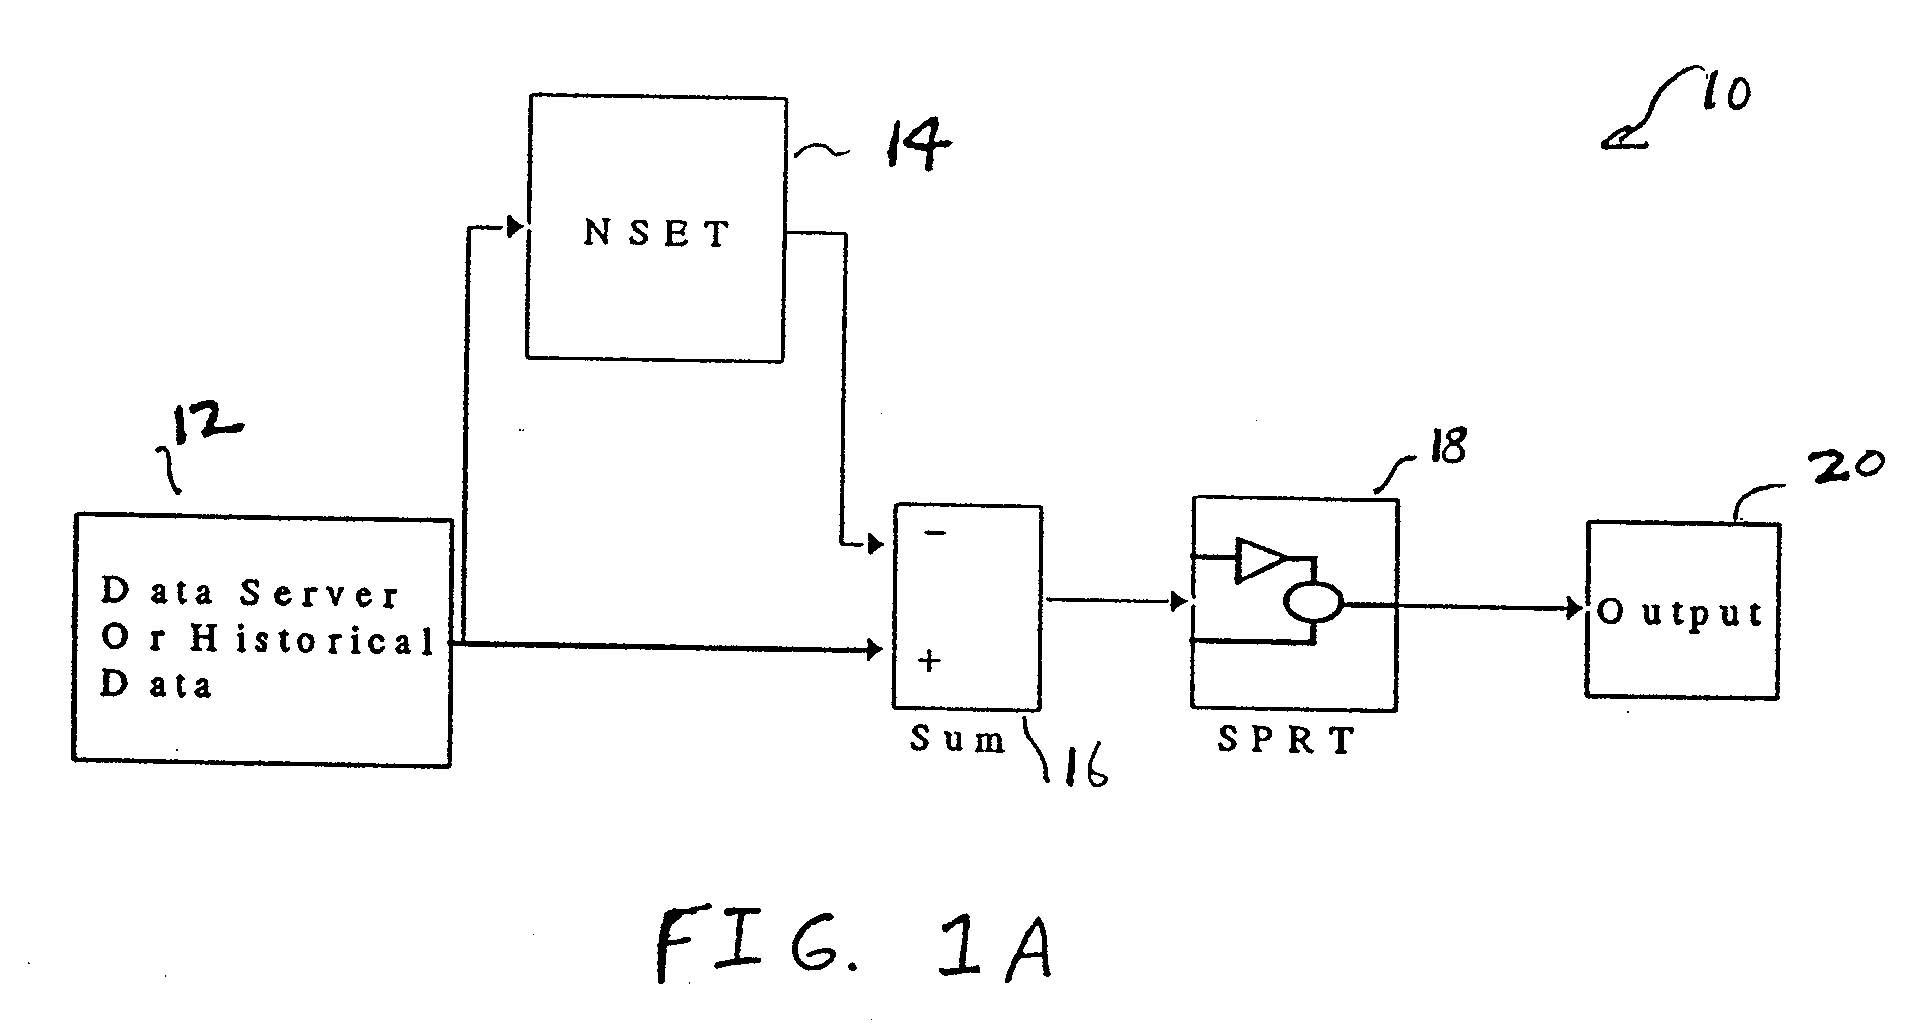 Method and System for Non-Linear State Estimation